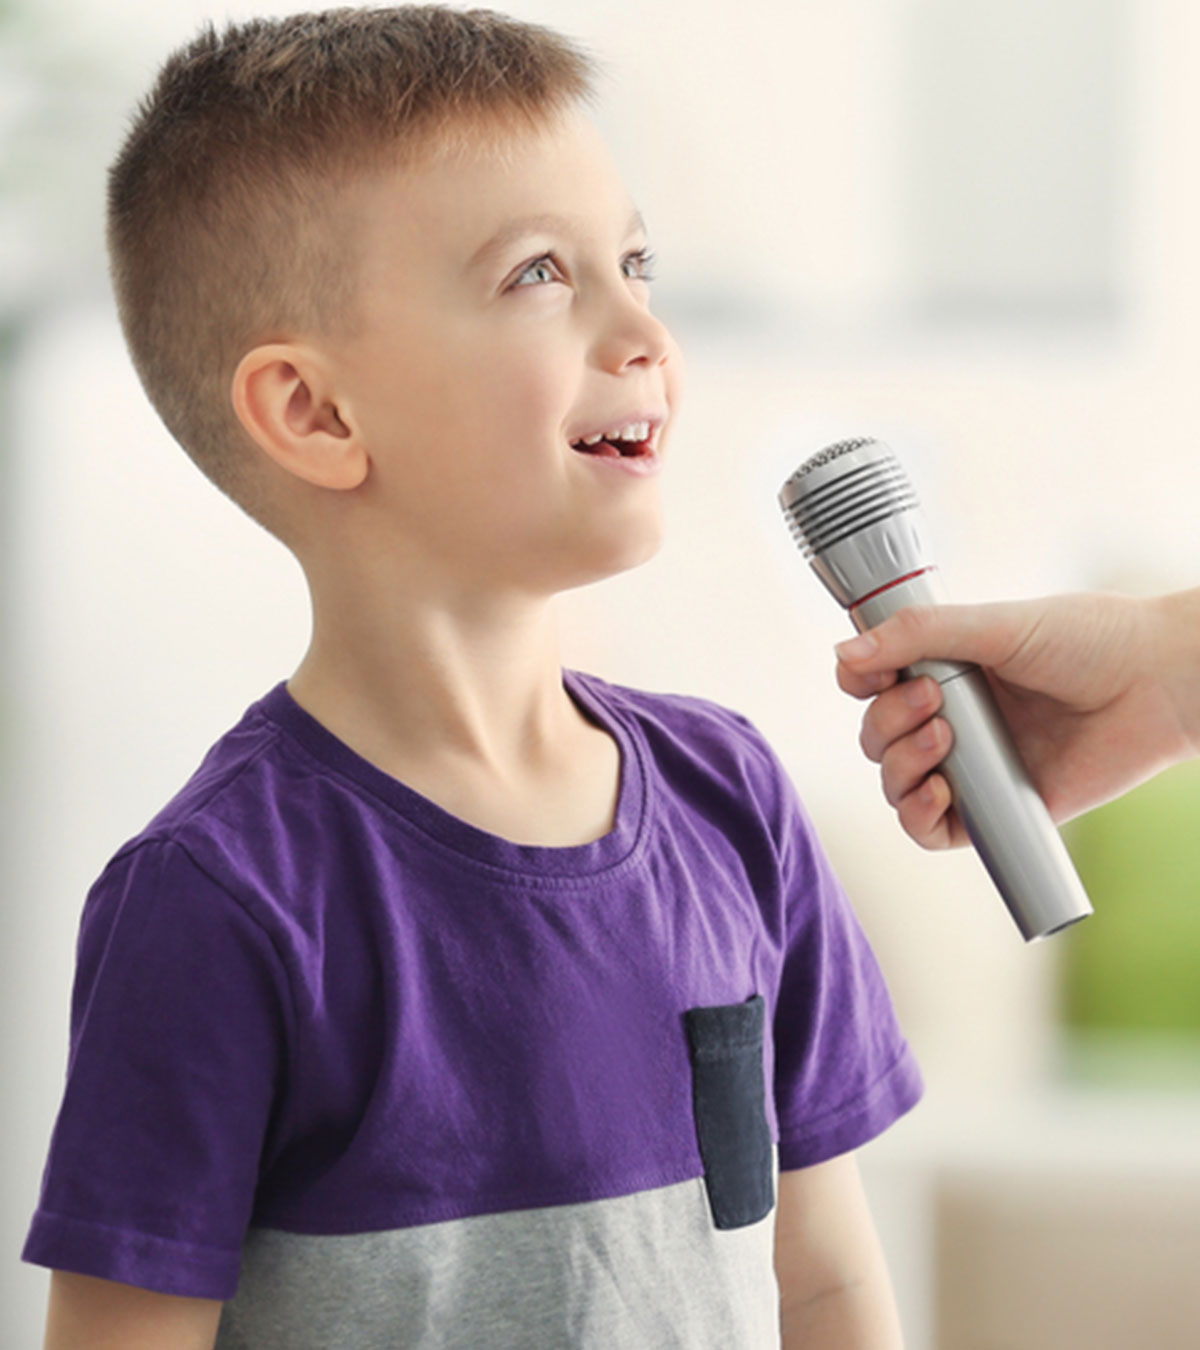 Communication Skills For Kids: Importance, Tips And Games